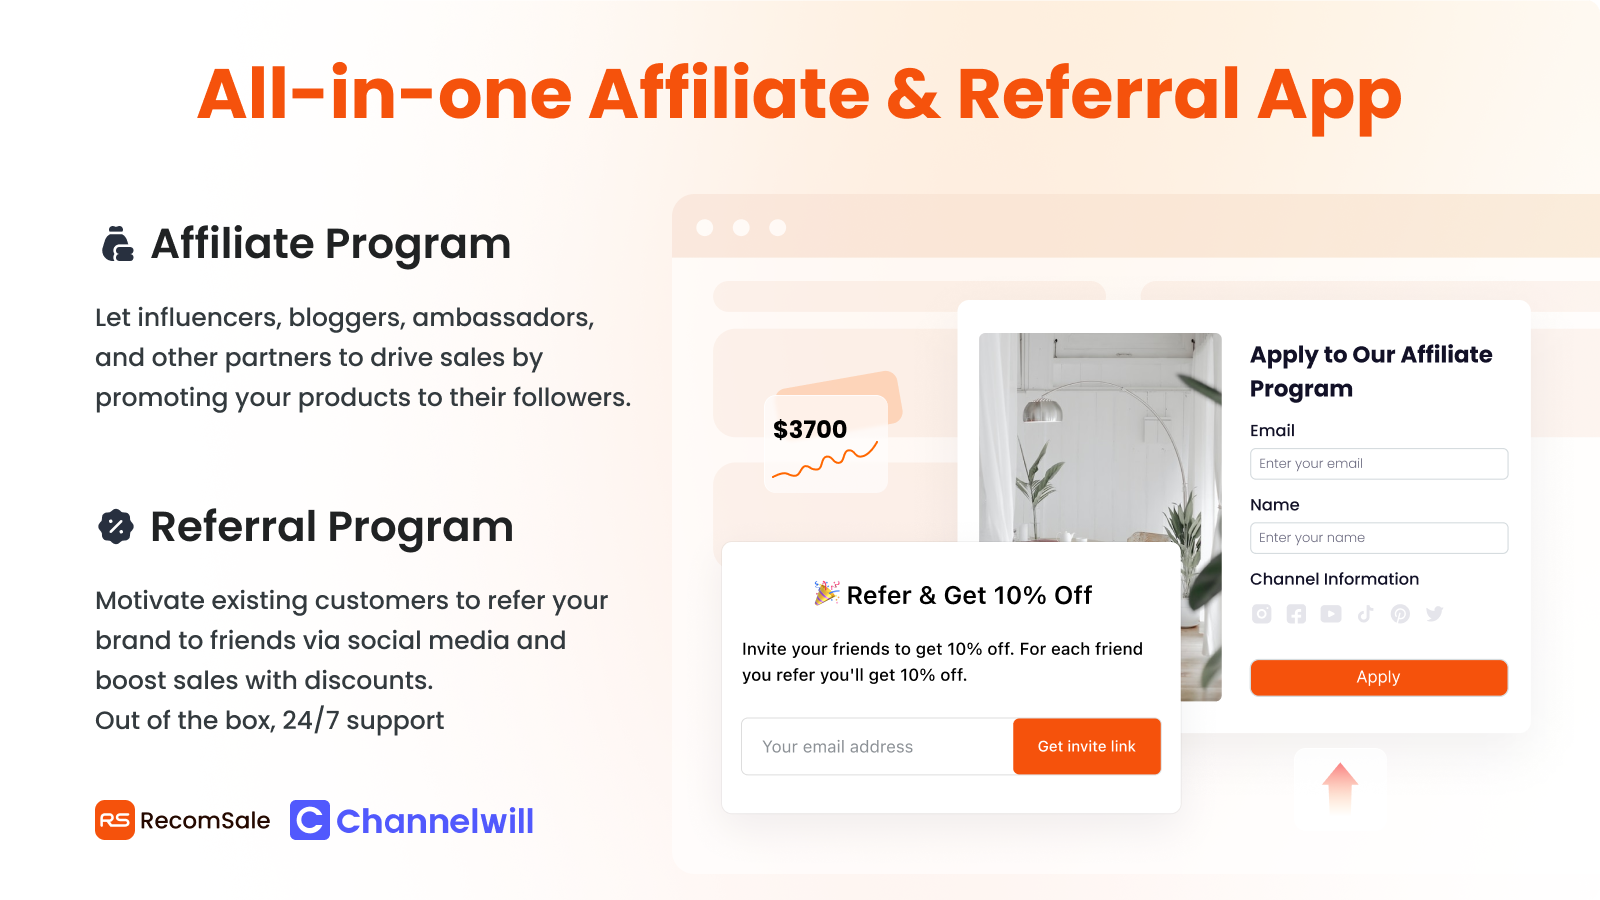 All-in-one Affiliate & Referral App